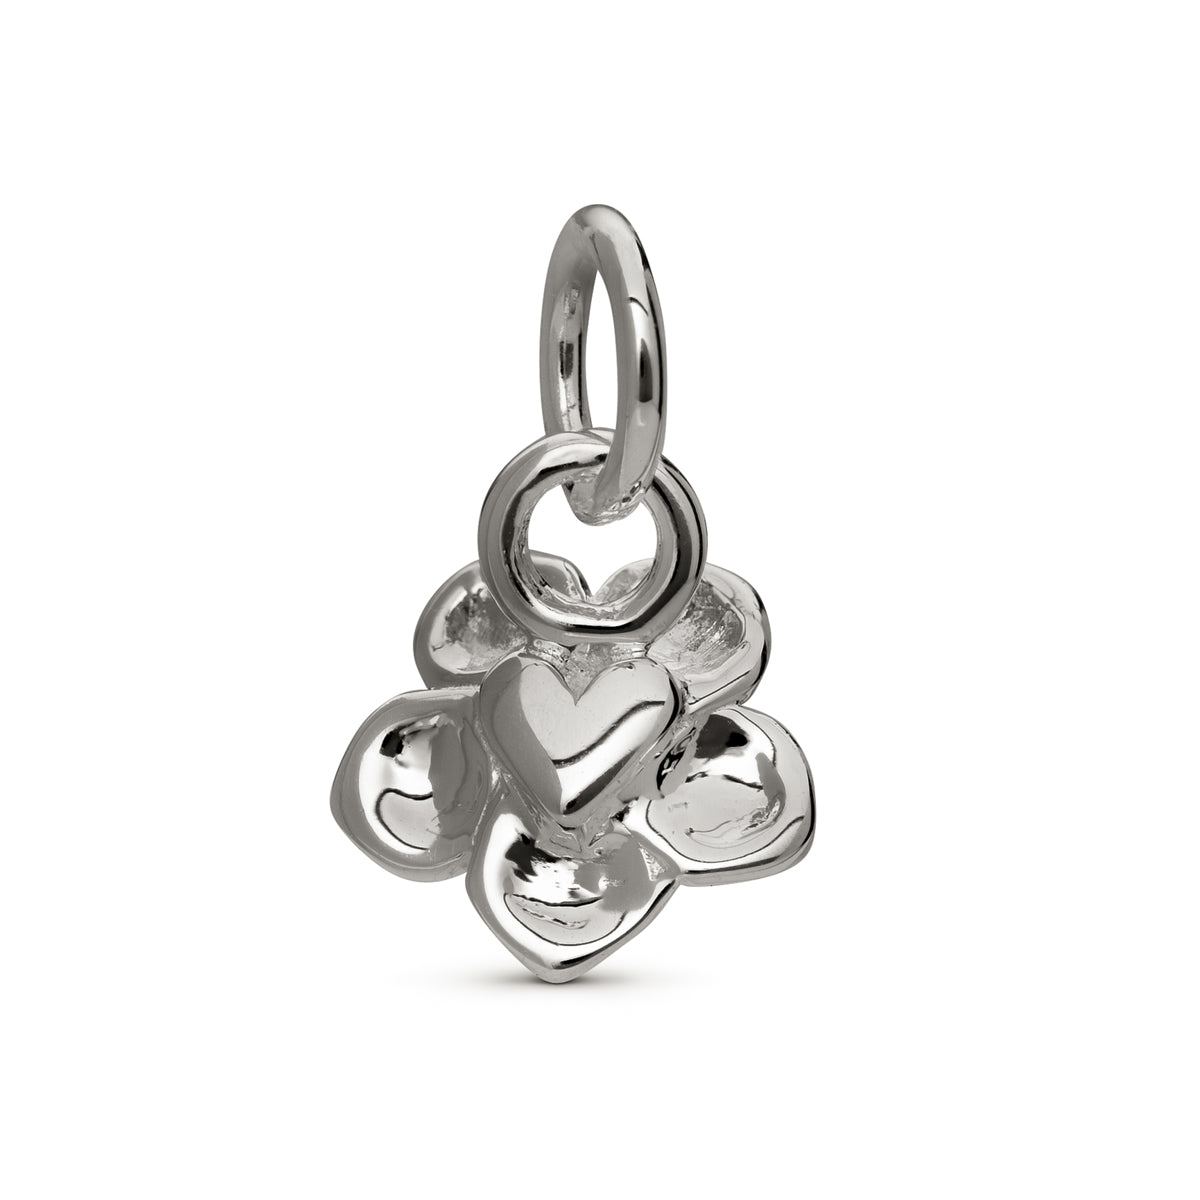 Forget-Me-Not Flower Personalised Silver Charm